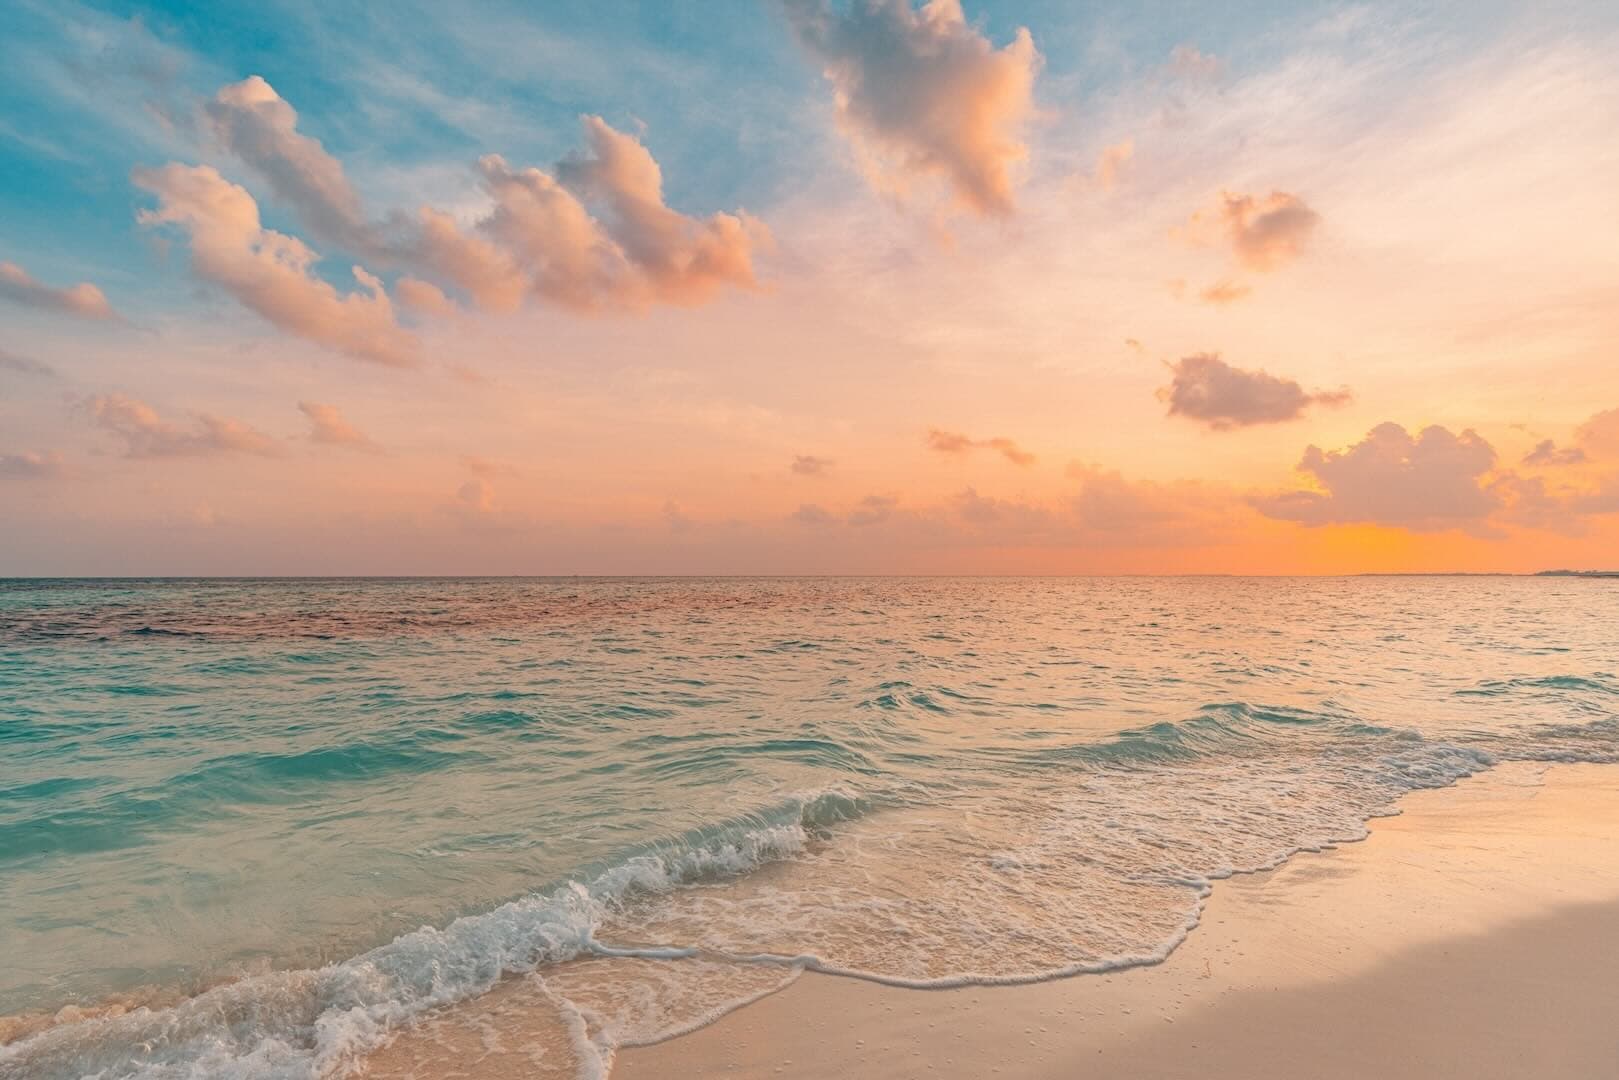 A calm sea and a beach, at sunset, with waves gently reaching the beach